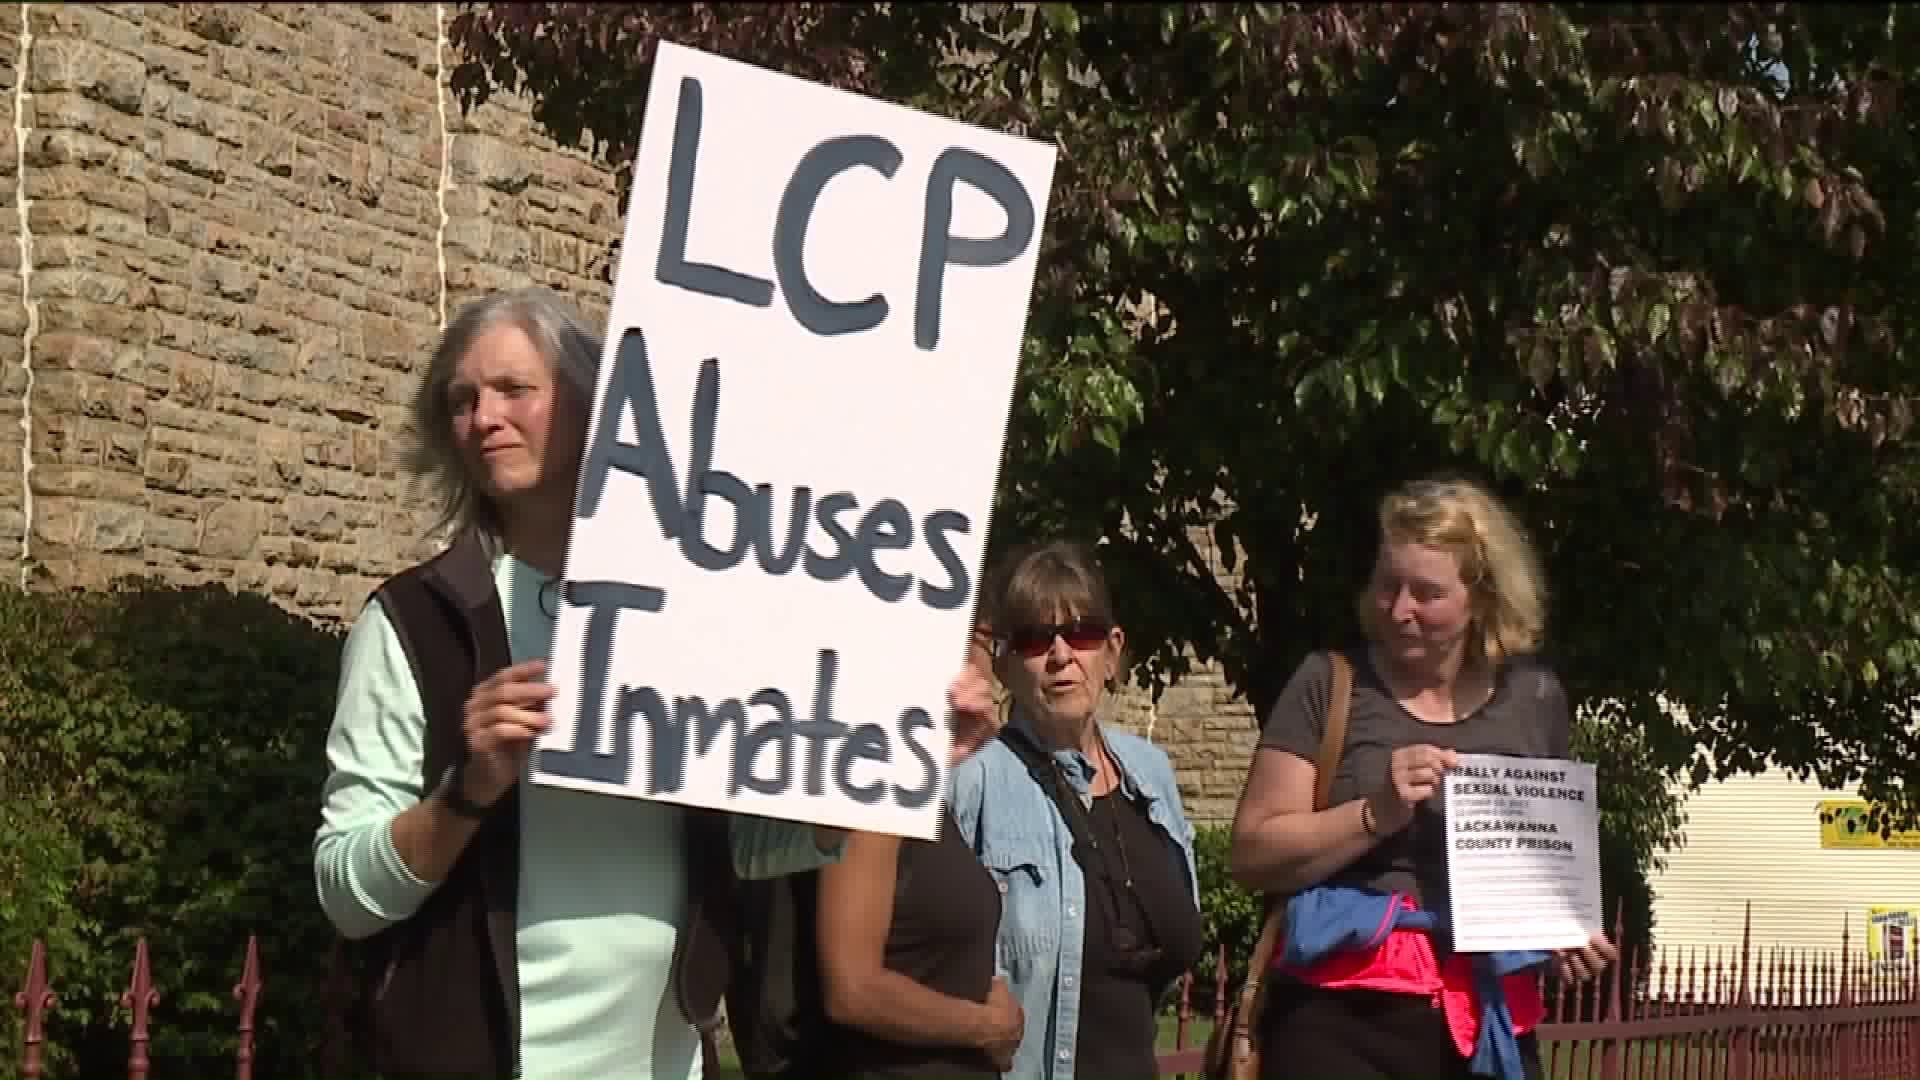 Protesters Rally Against Sexual Violence at Lackawanna County Prison